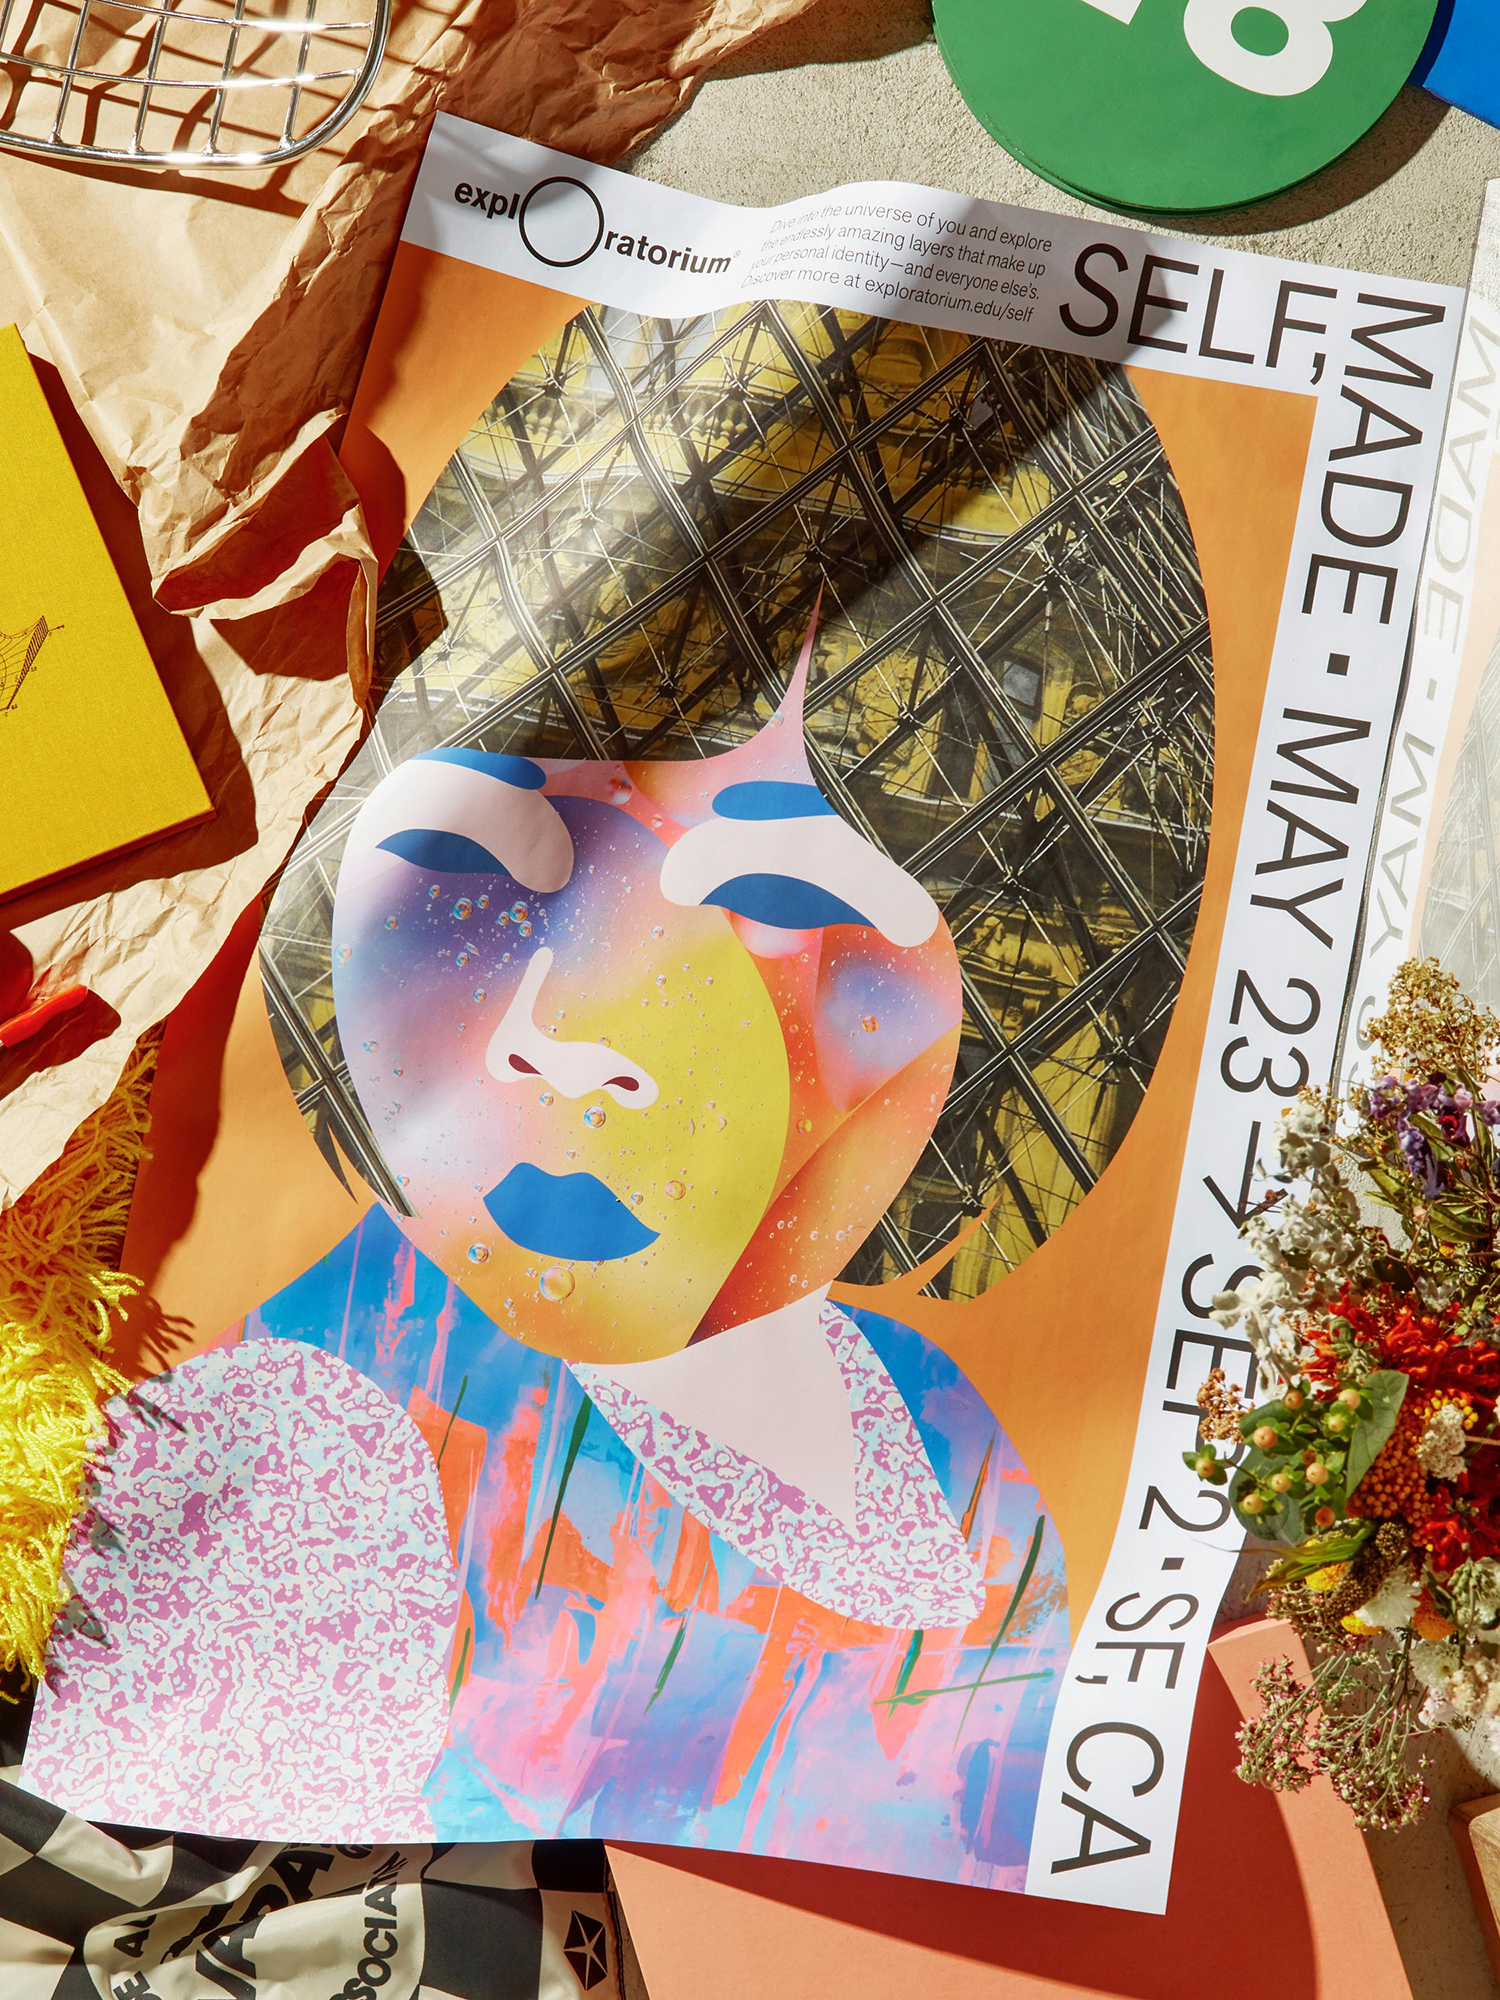 Poster Design Inspiration – Self, Made by Collins